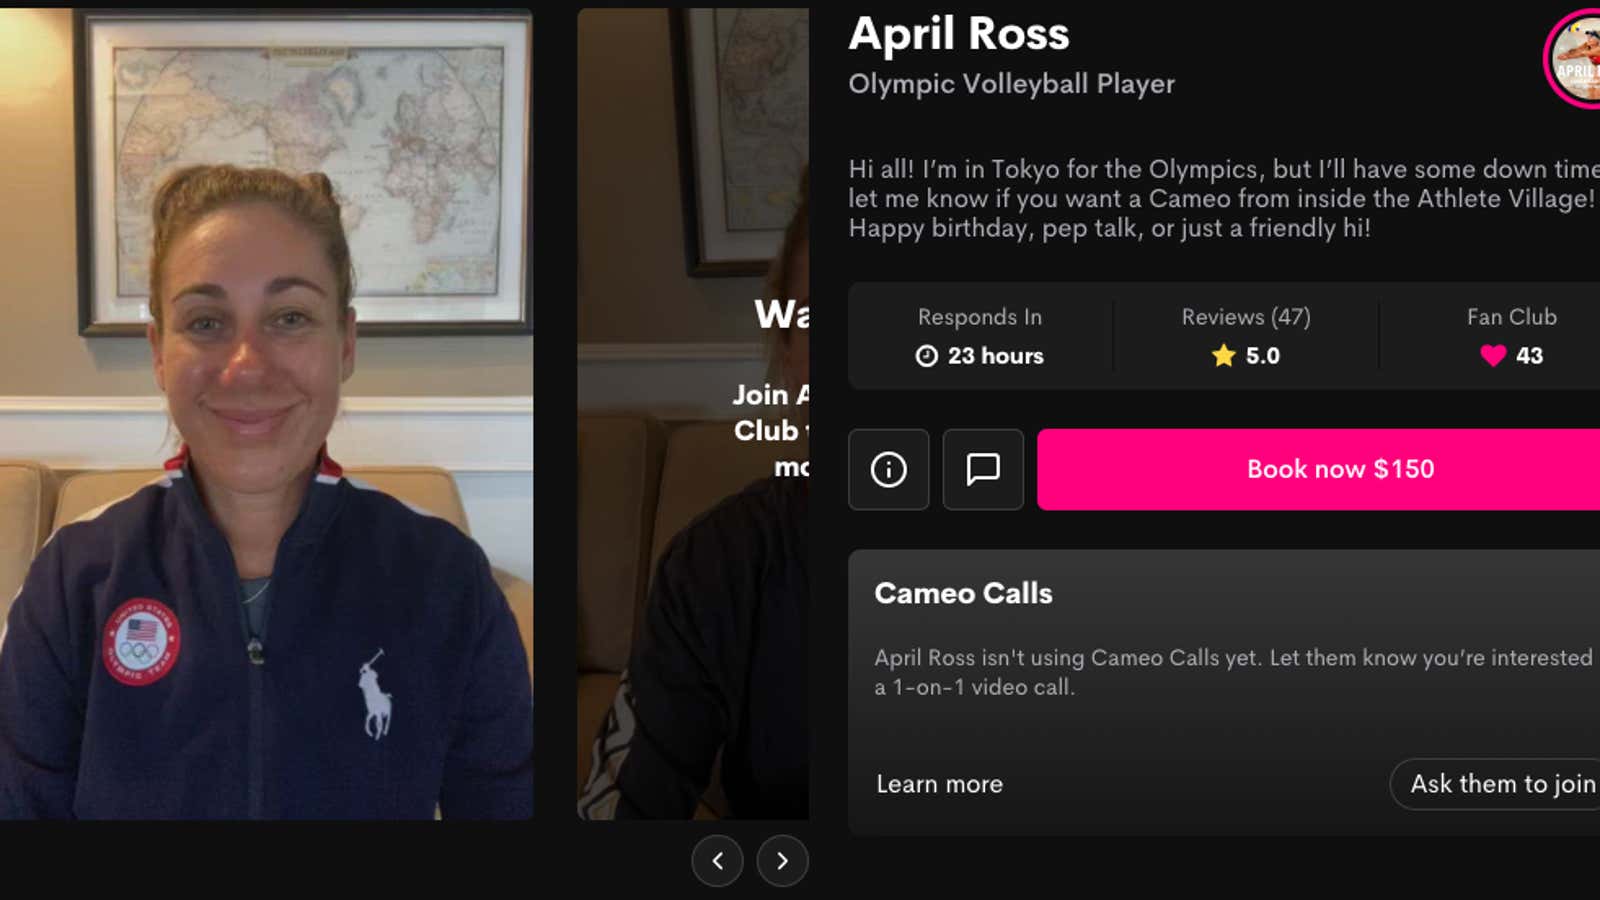 US Olympic volleyball player April Rossâ€™s profile on Cameo.